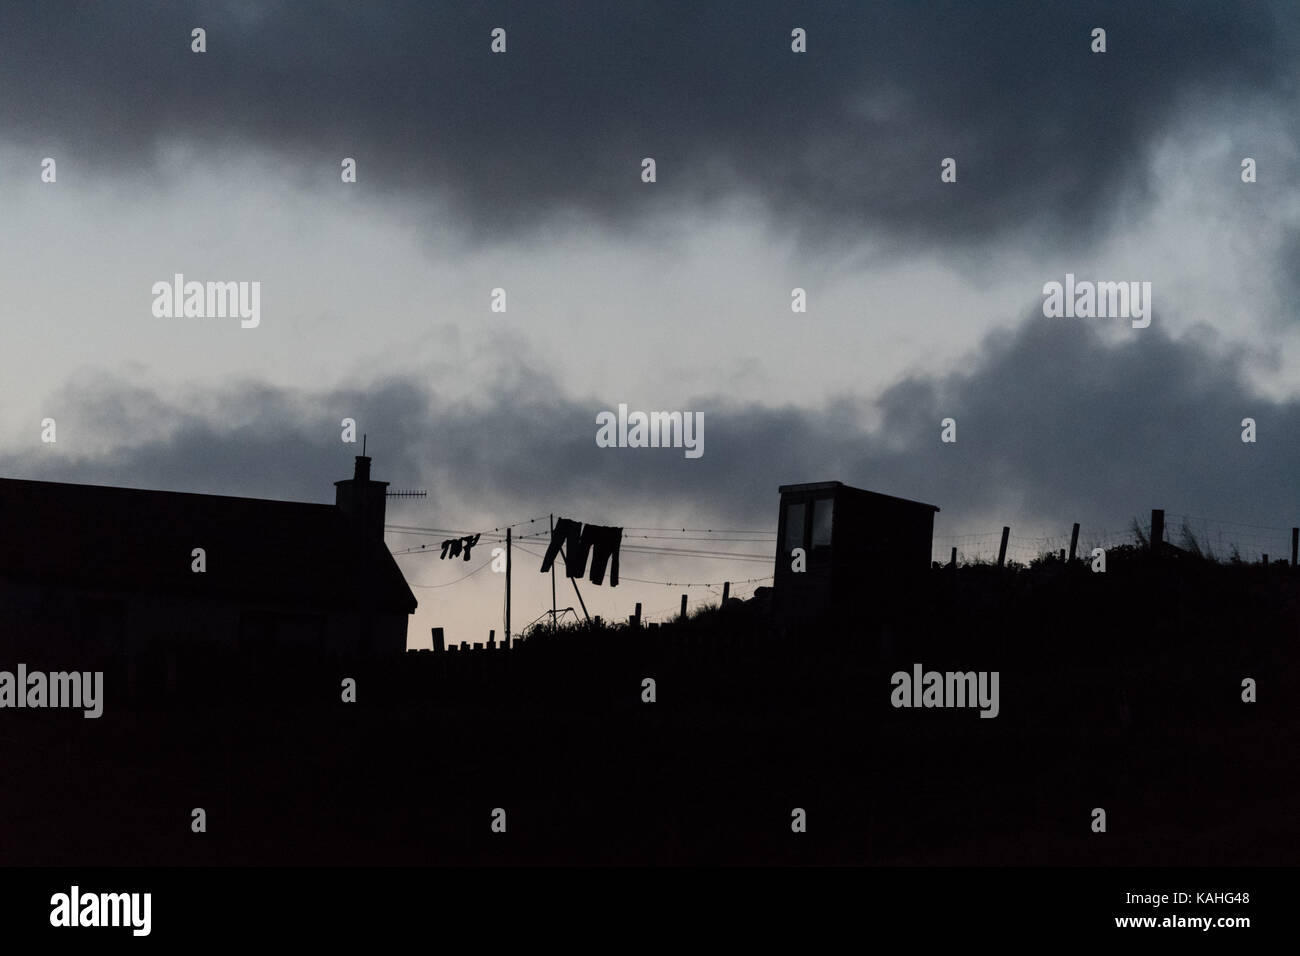 silhouette of simple rural house washing line and outbuilding in uk on a bleak windy evening Stock Photo